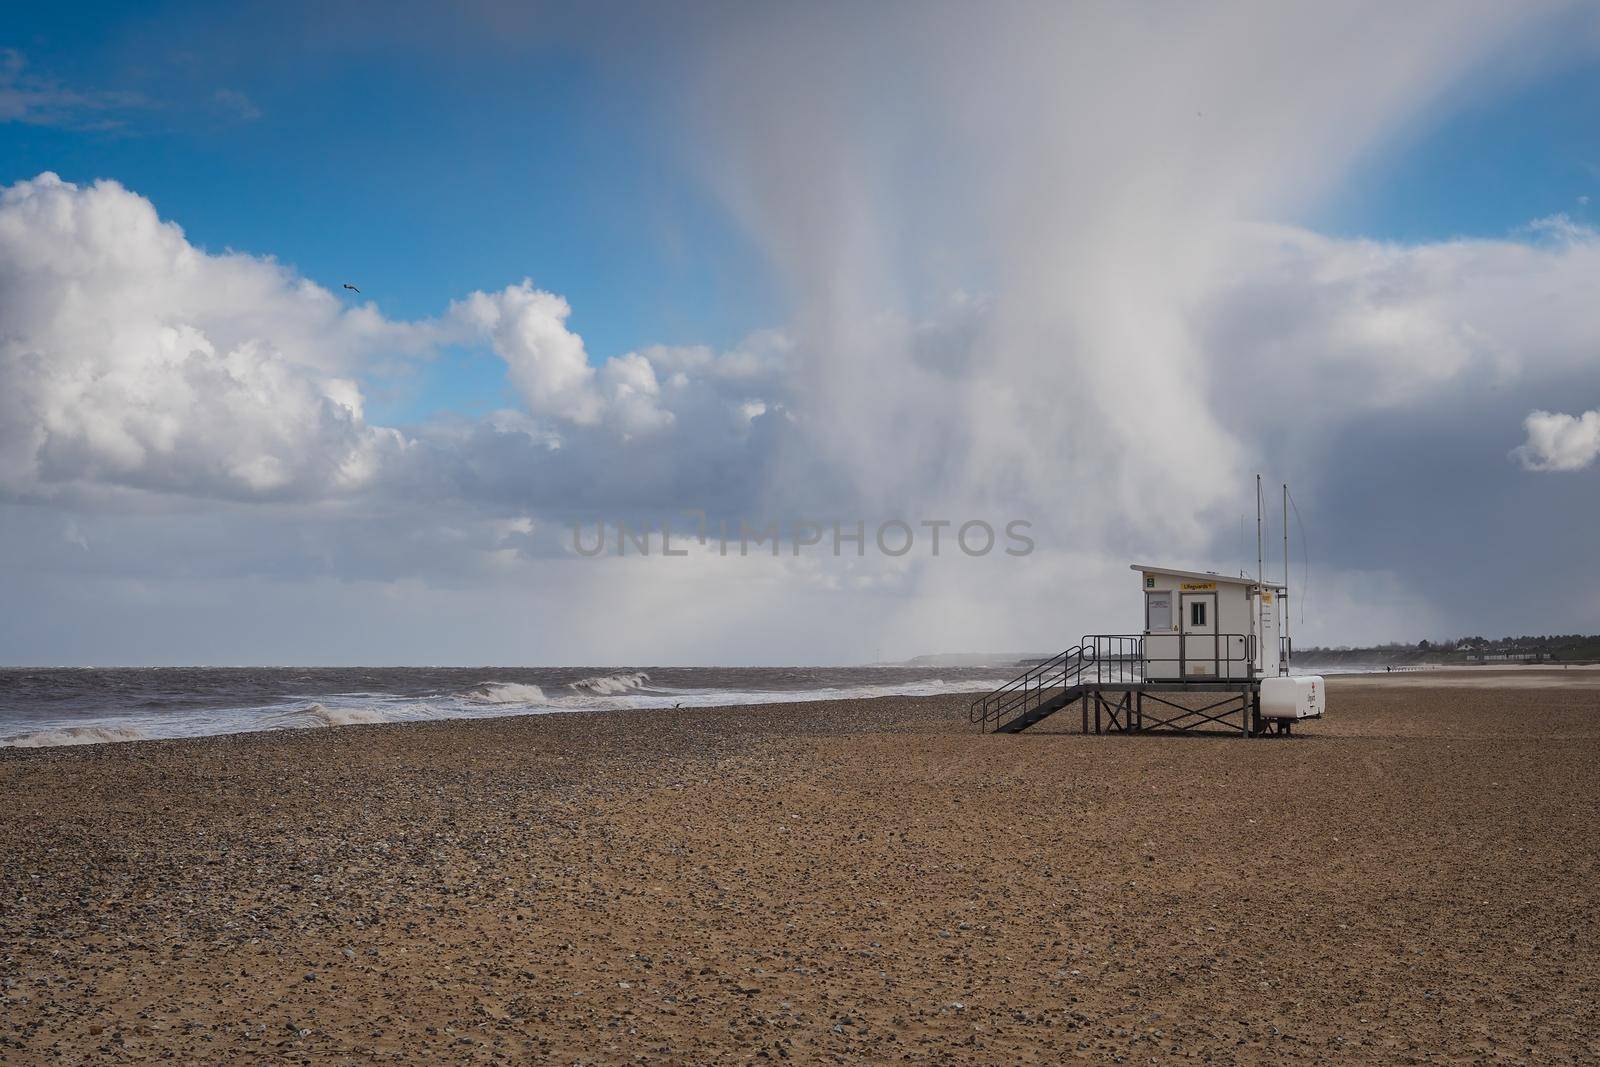 Hail storm above lifeguard hut on cold empty beach, Gorleston-on-Sea, Norfolk by PhilHarland